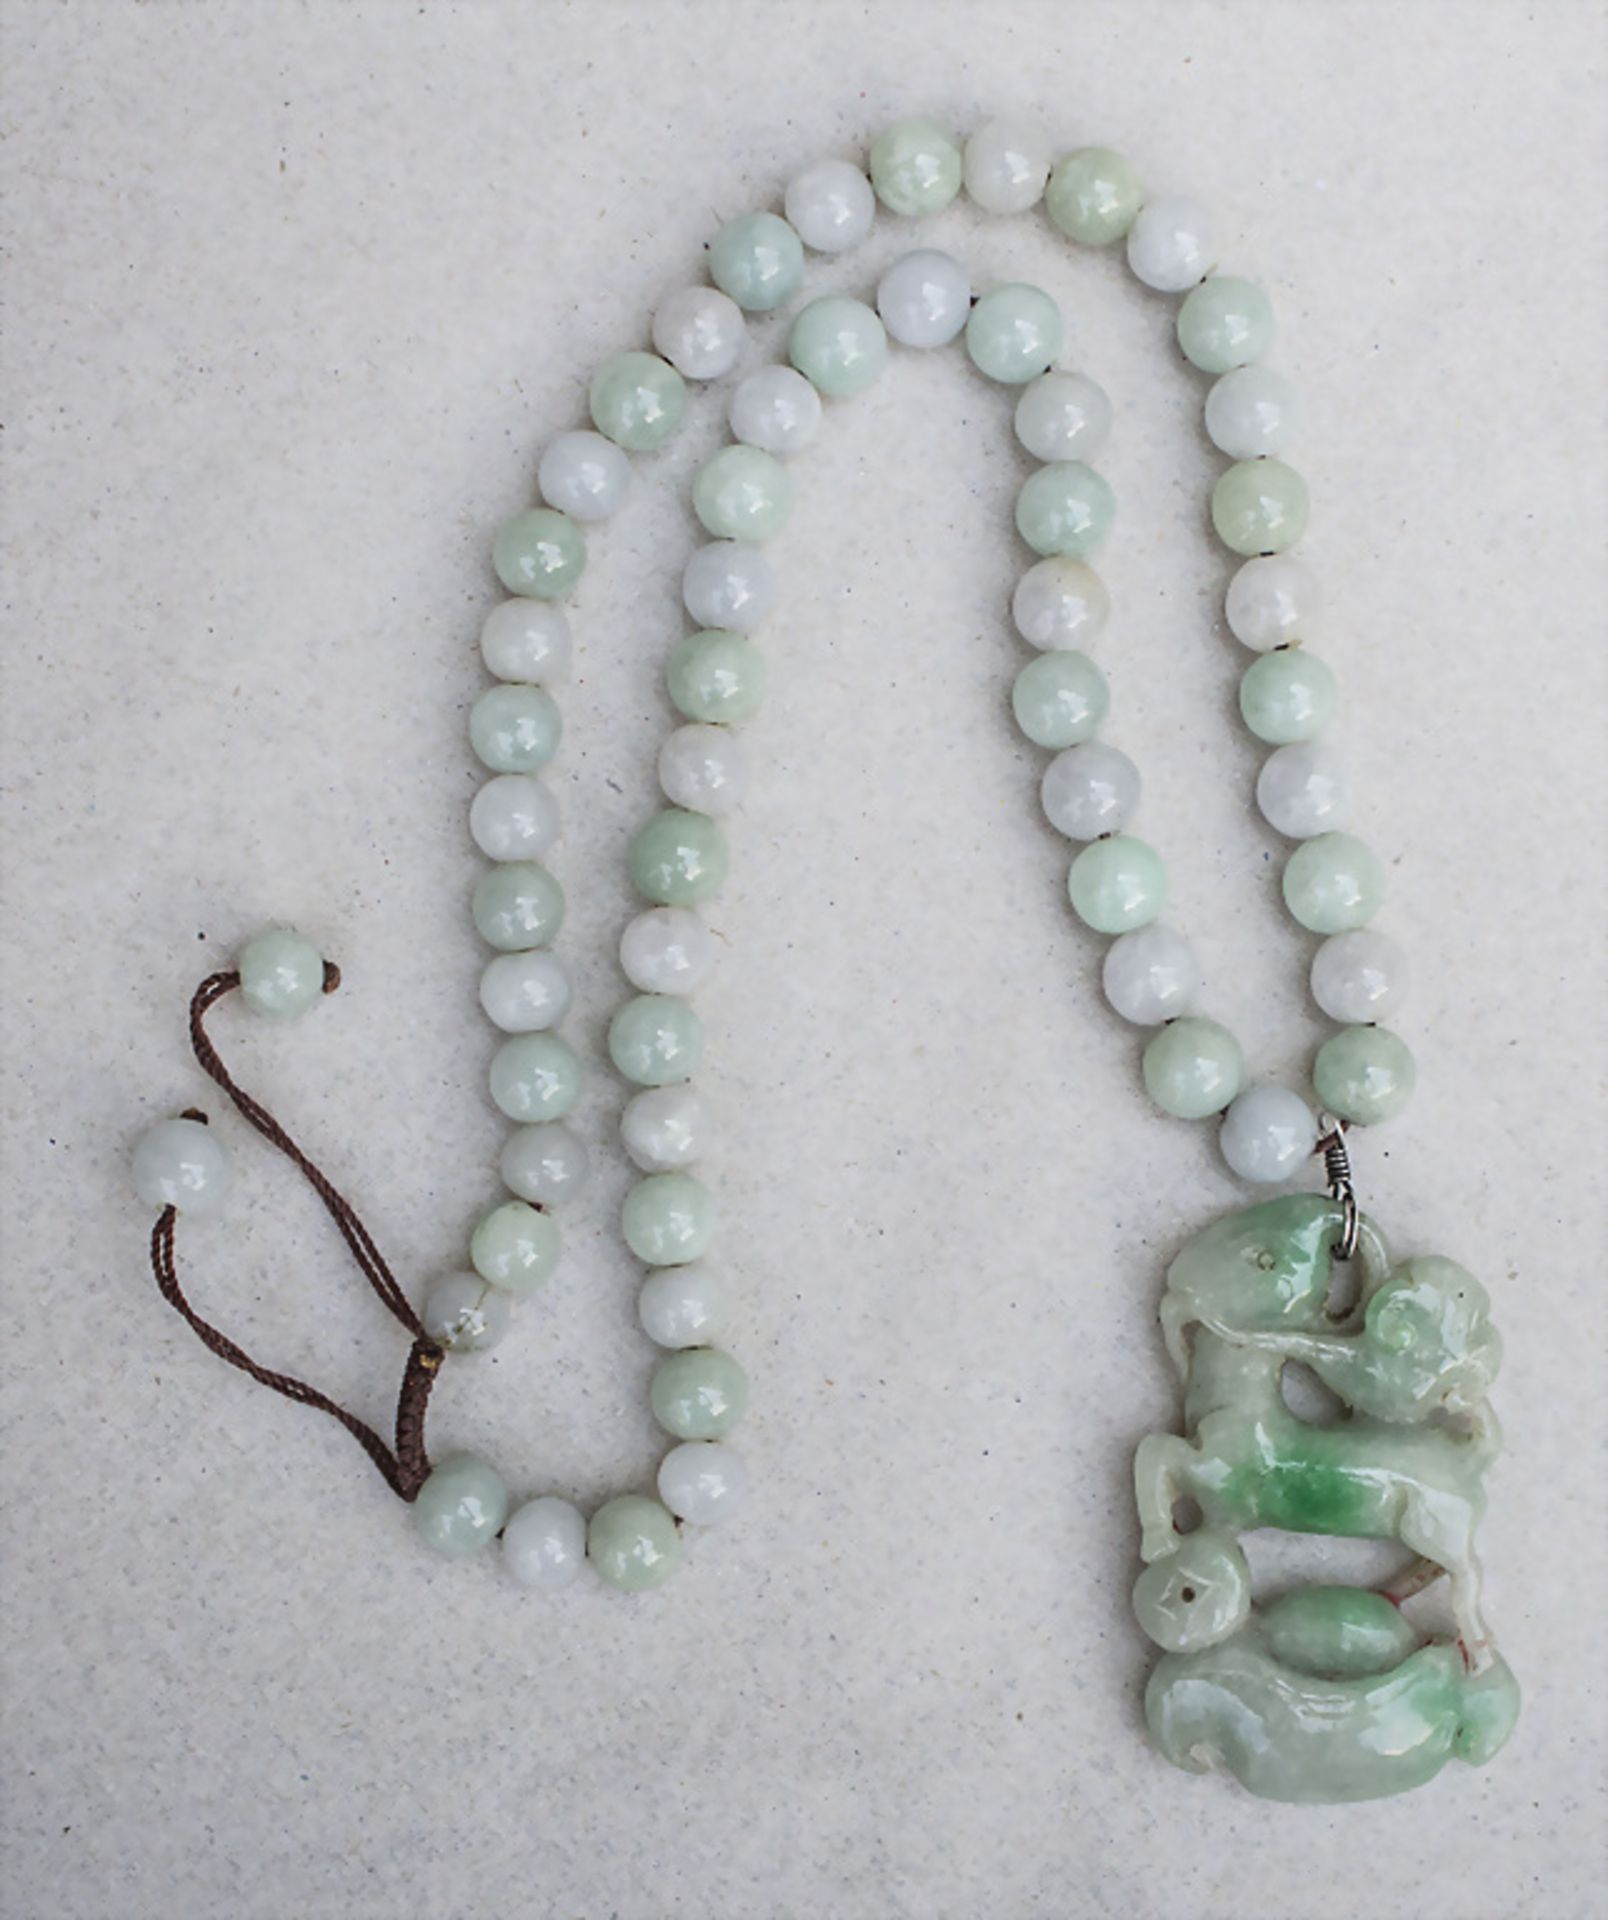 Jadekette mit Glückssymbol / A jade necklace with a lucky symbol, China, Qing-Dynastie (1644-1911) - Image 8 of 10